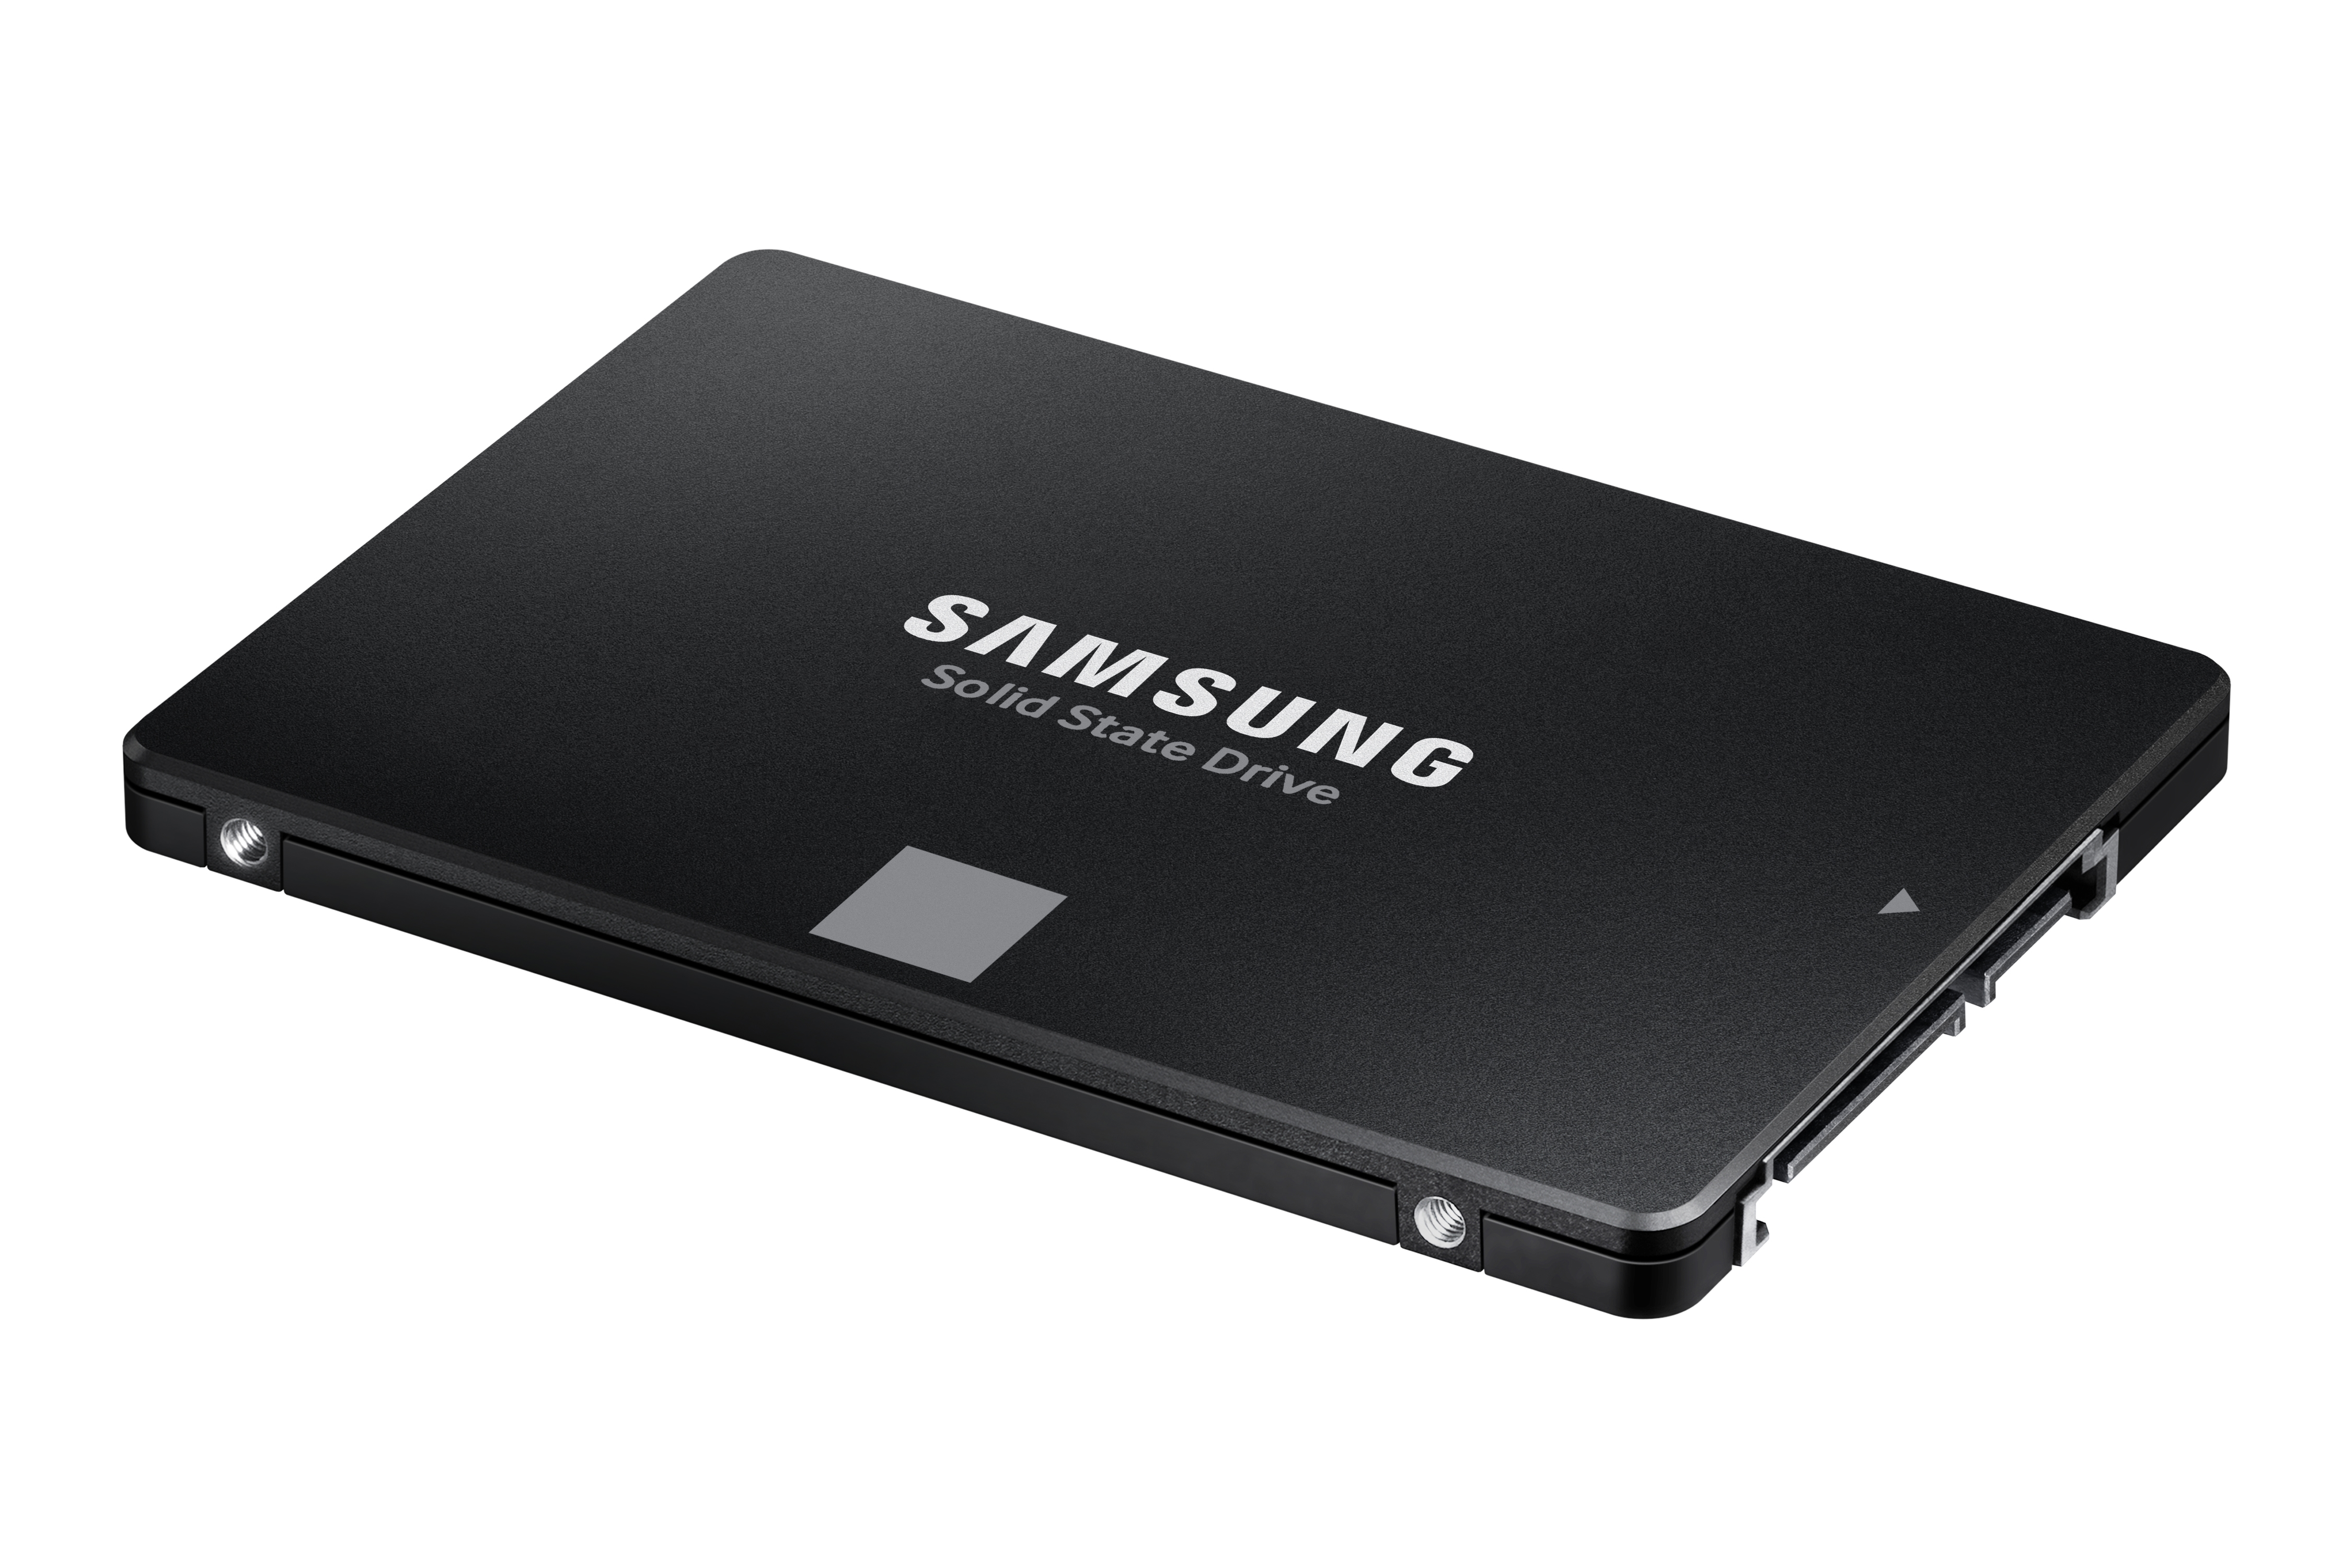 Samsung aims to ship 2.5m Galaxy Z Flip devices this year: reports